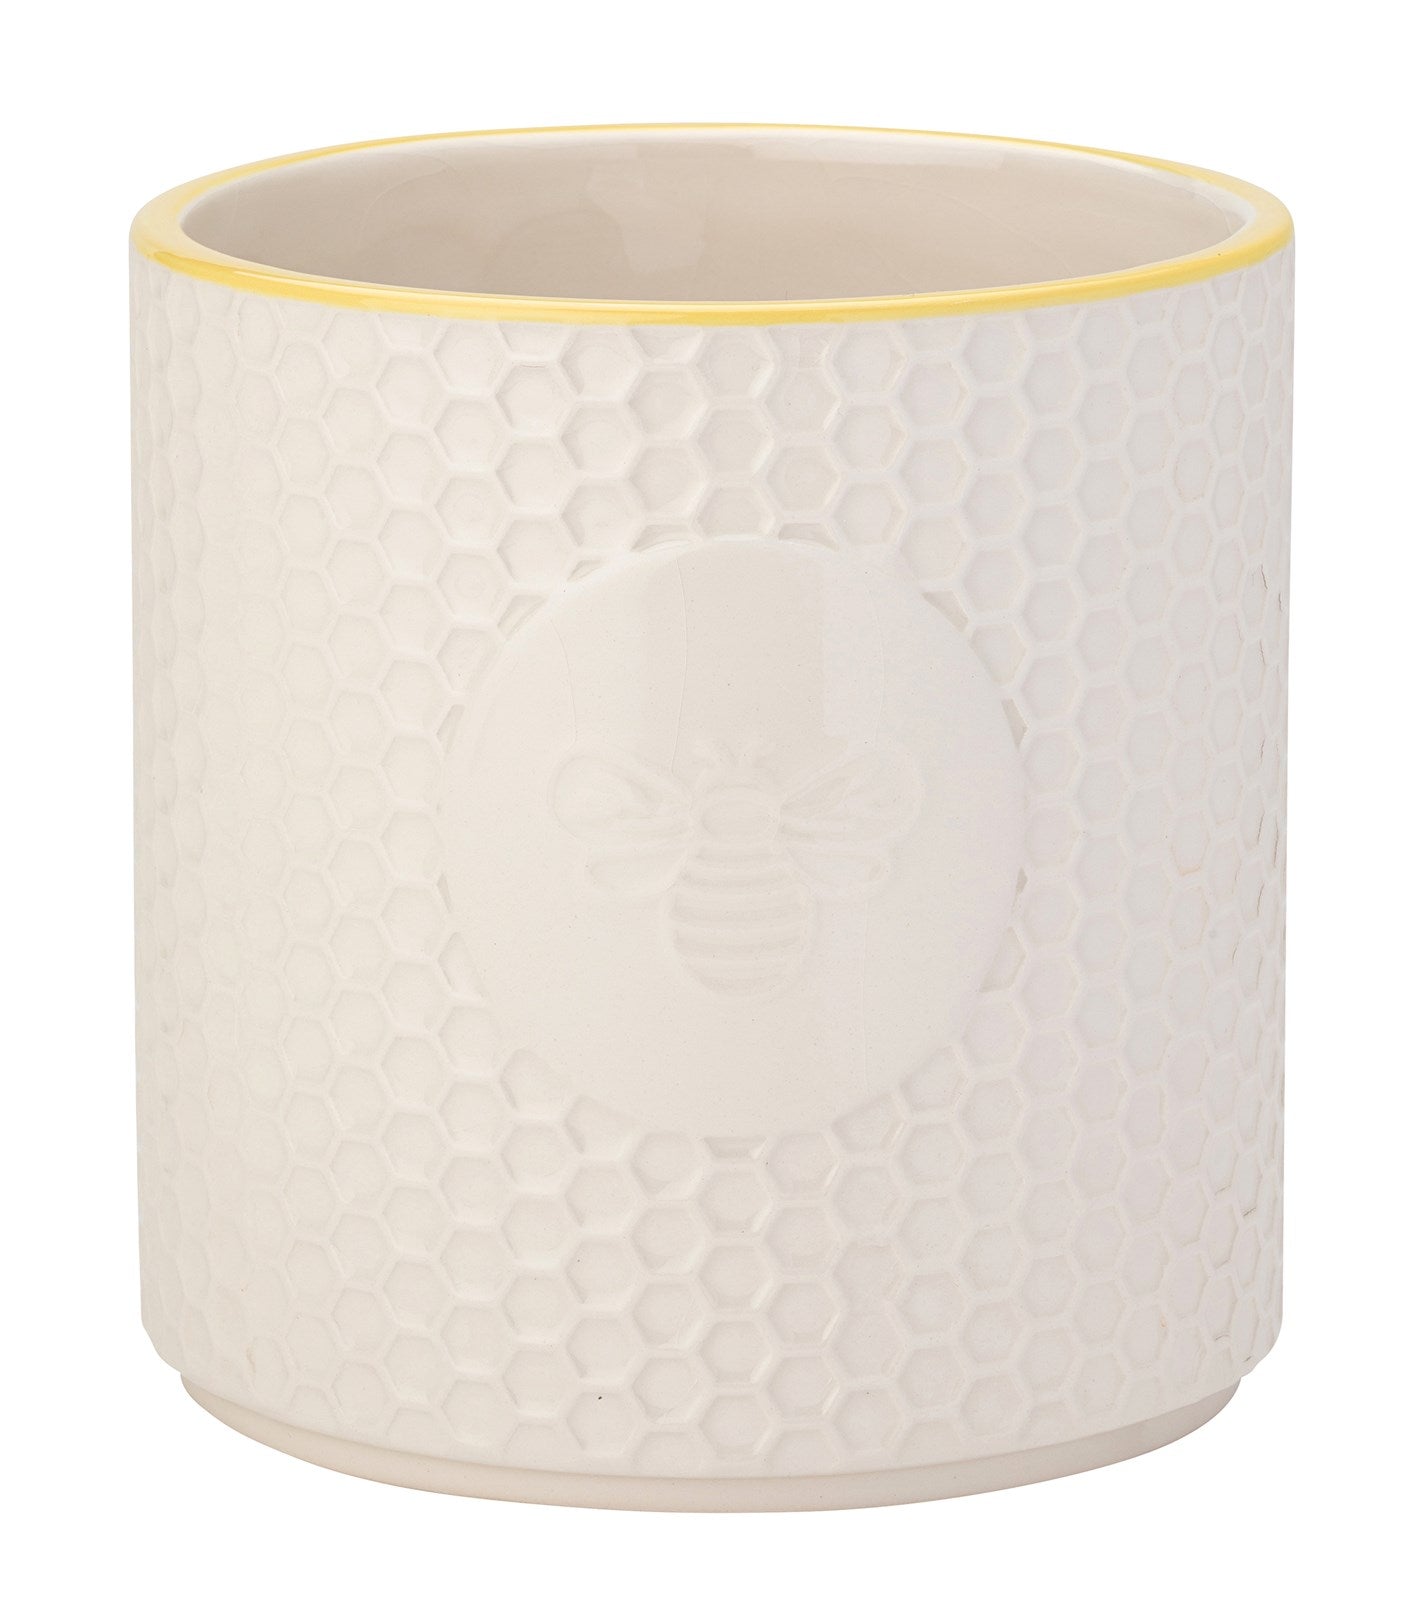 The English Tableware Company Bee Happy Large Planter